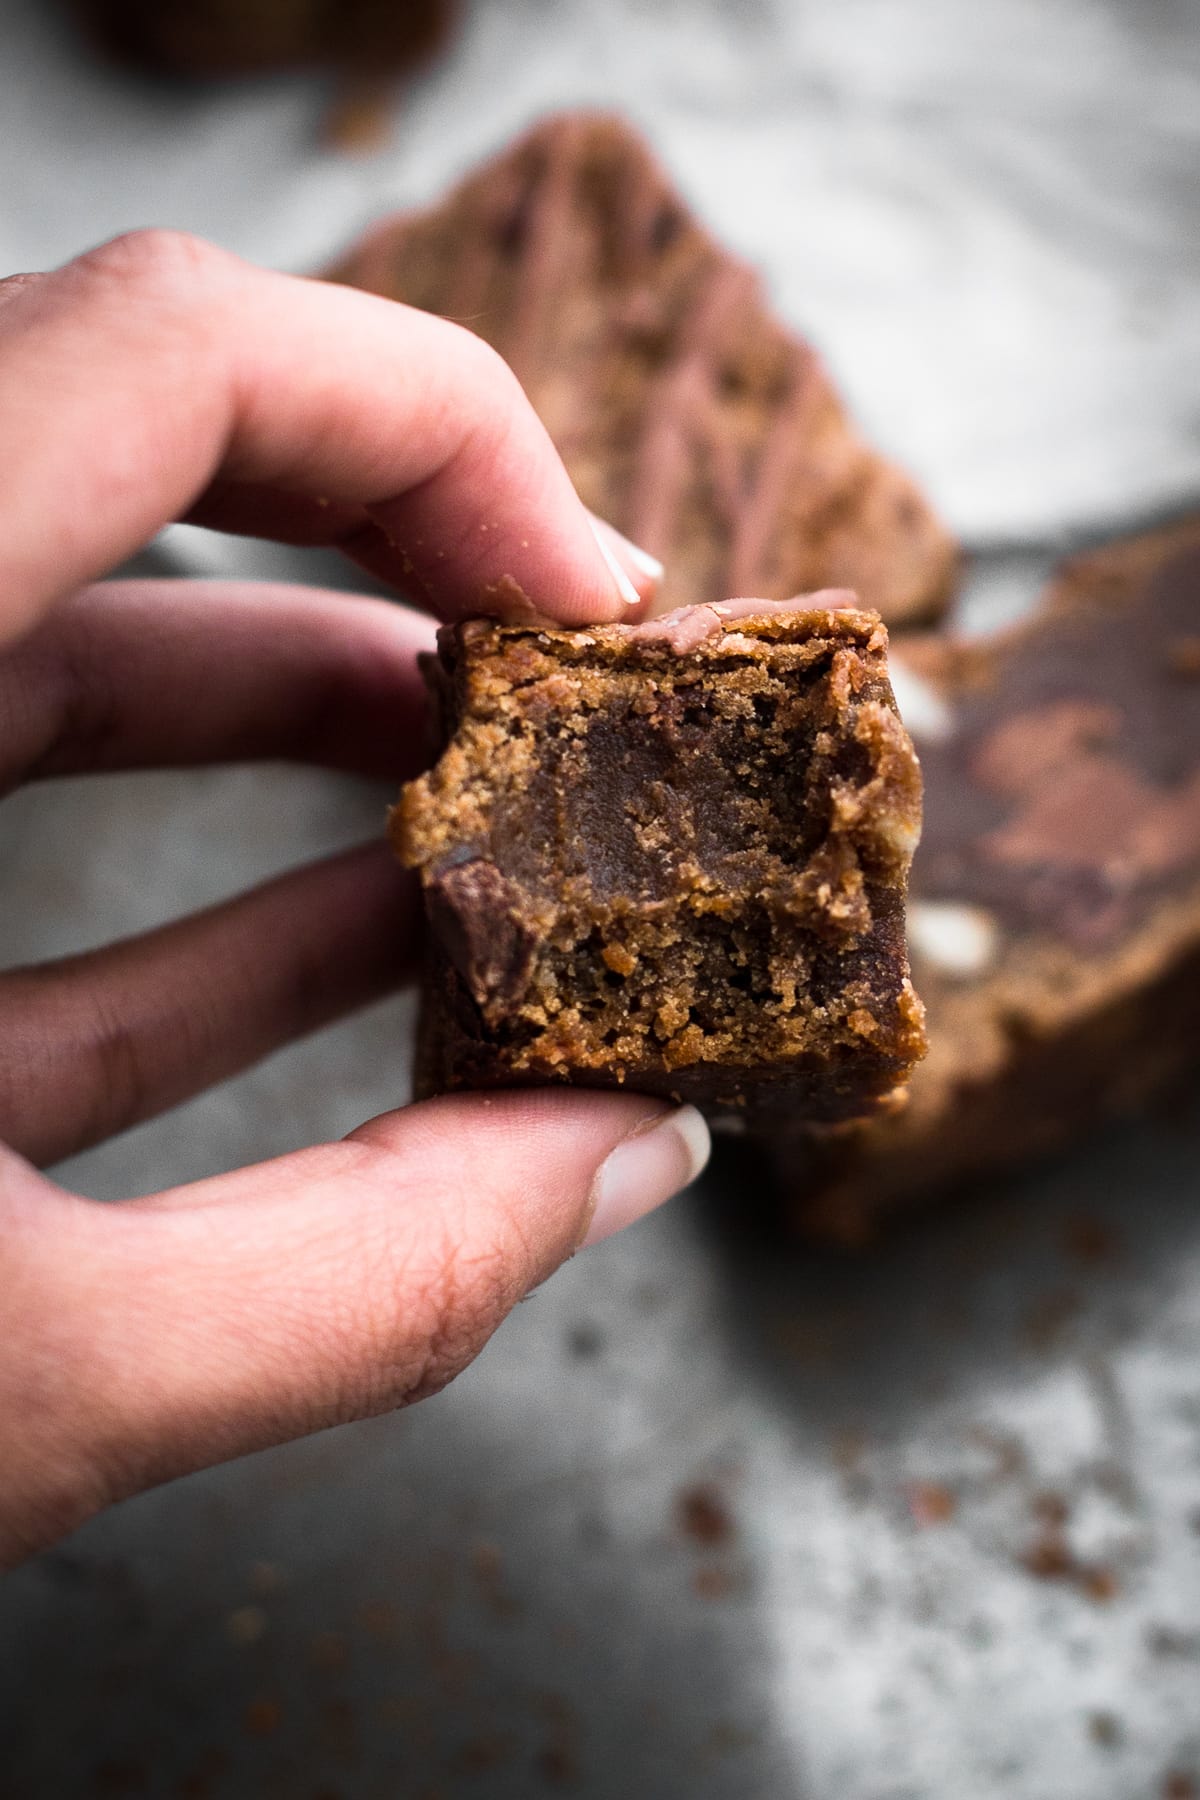 A delicious Chewy Vegan Blondie with hints of caramel and studded with Vegan Dark and Milk Chocolate Chunks. Ready in under 30 minutes. #vegan #brownies #blondies #chewy #dessert #baking #plantbased #simple #brownsugar